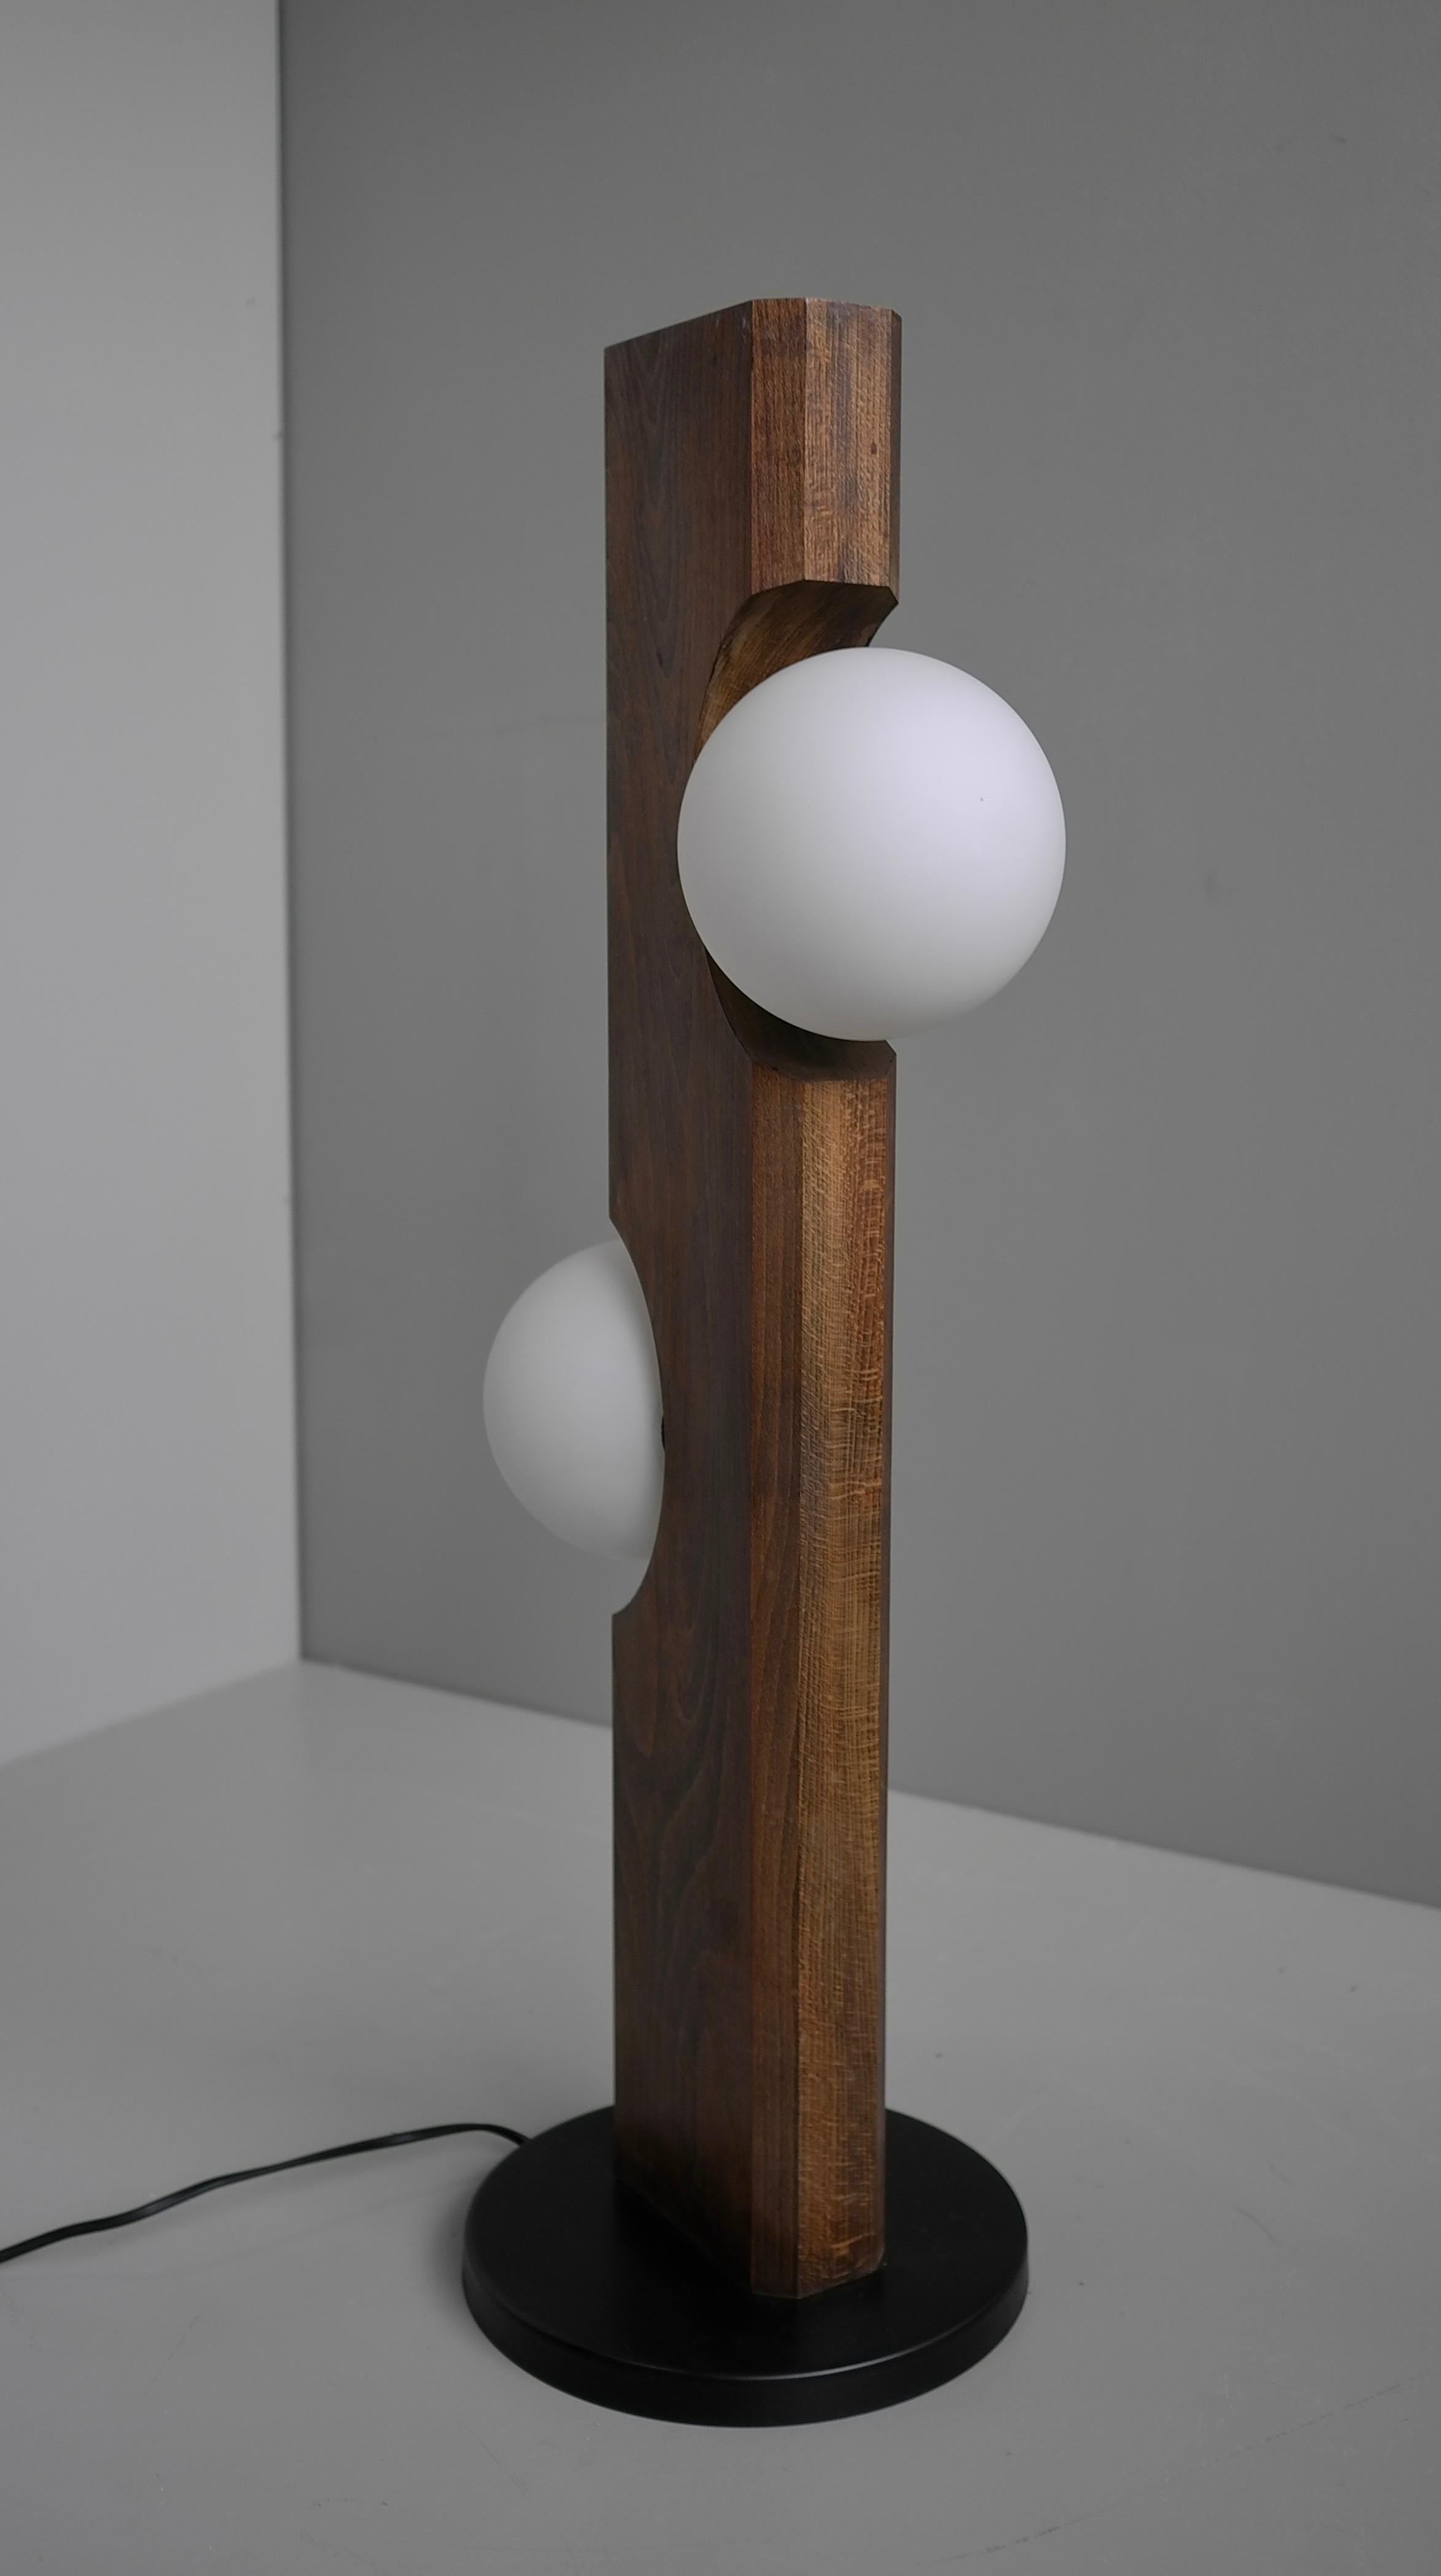 Mid-Century Modern Temde Leuchten Floor or Table Lamp in Wood with White Glass Balls, Germany 1969 For Sale